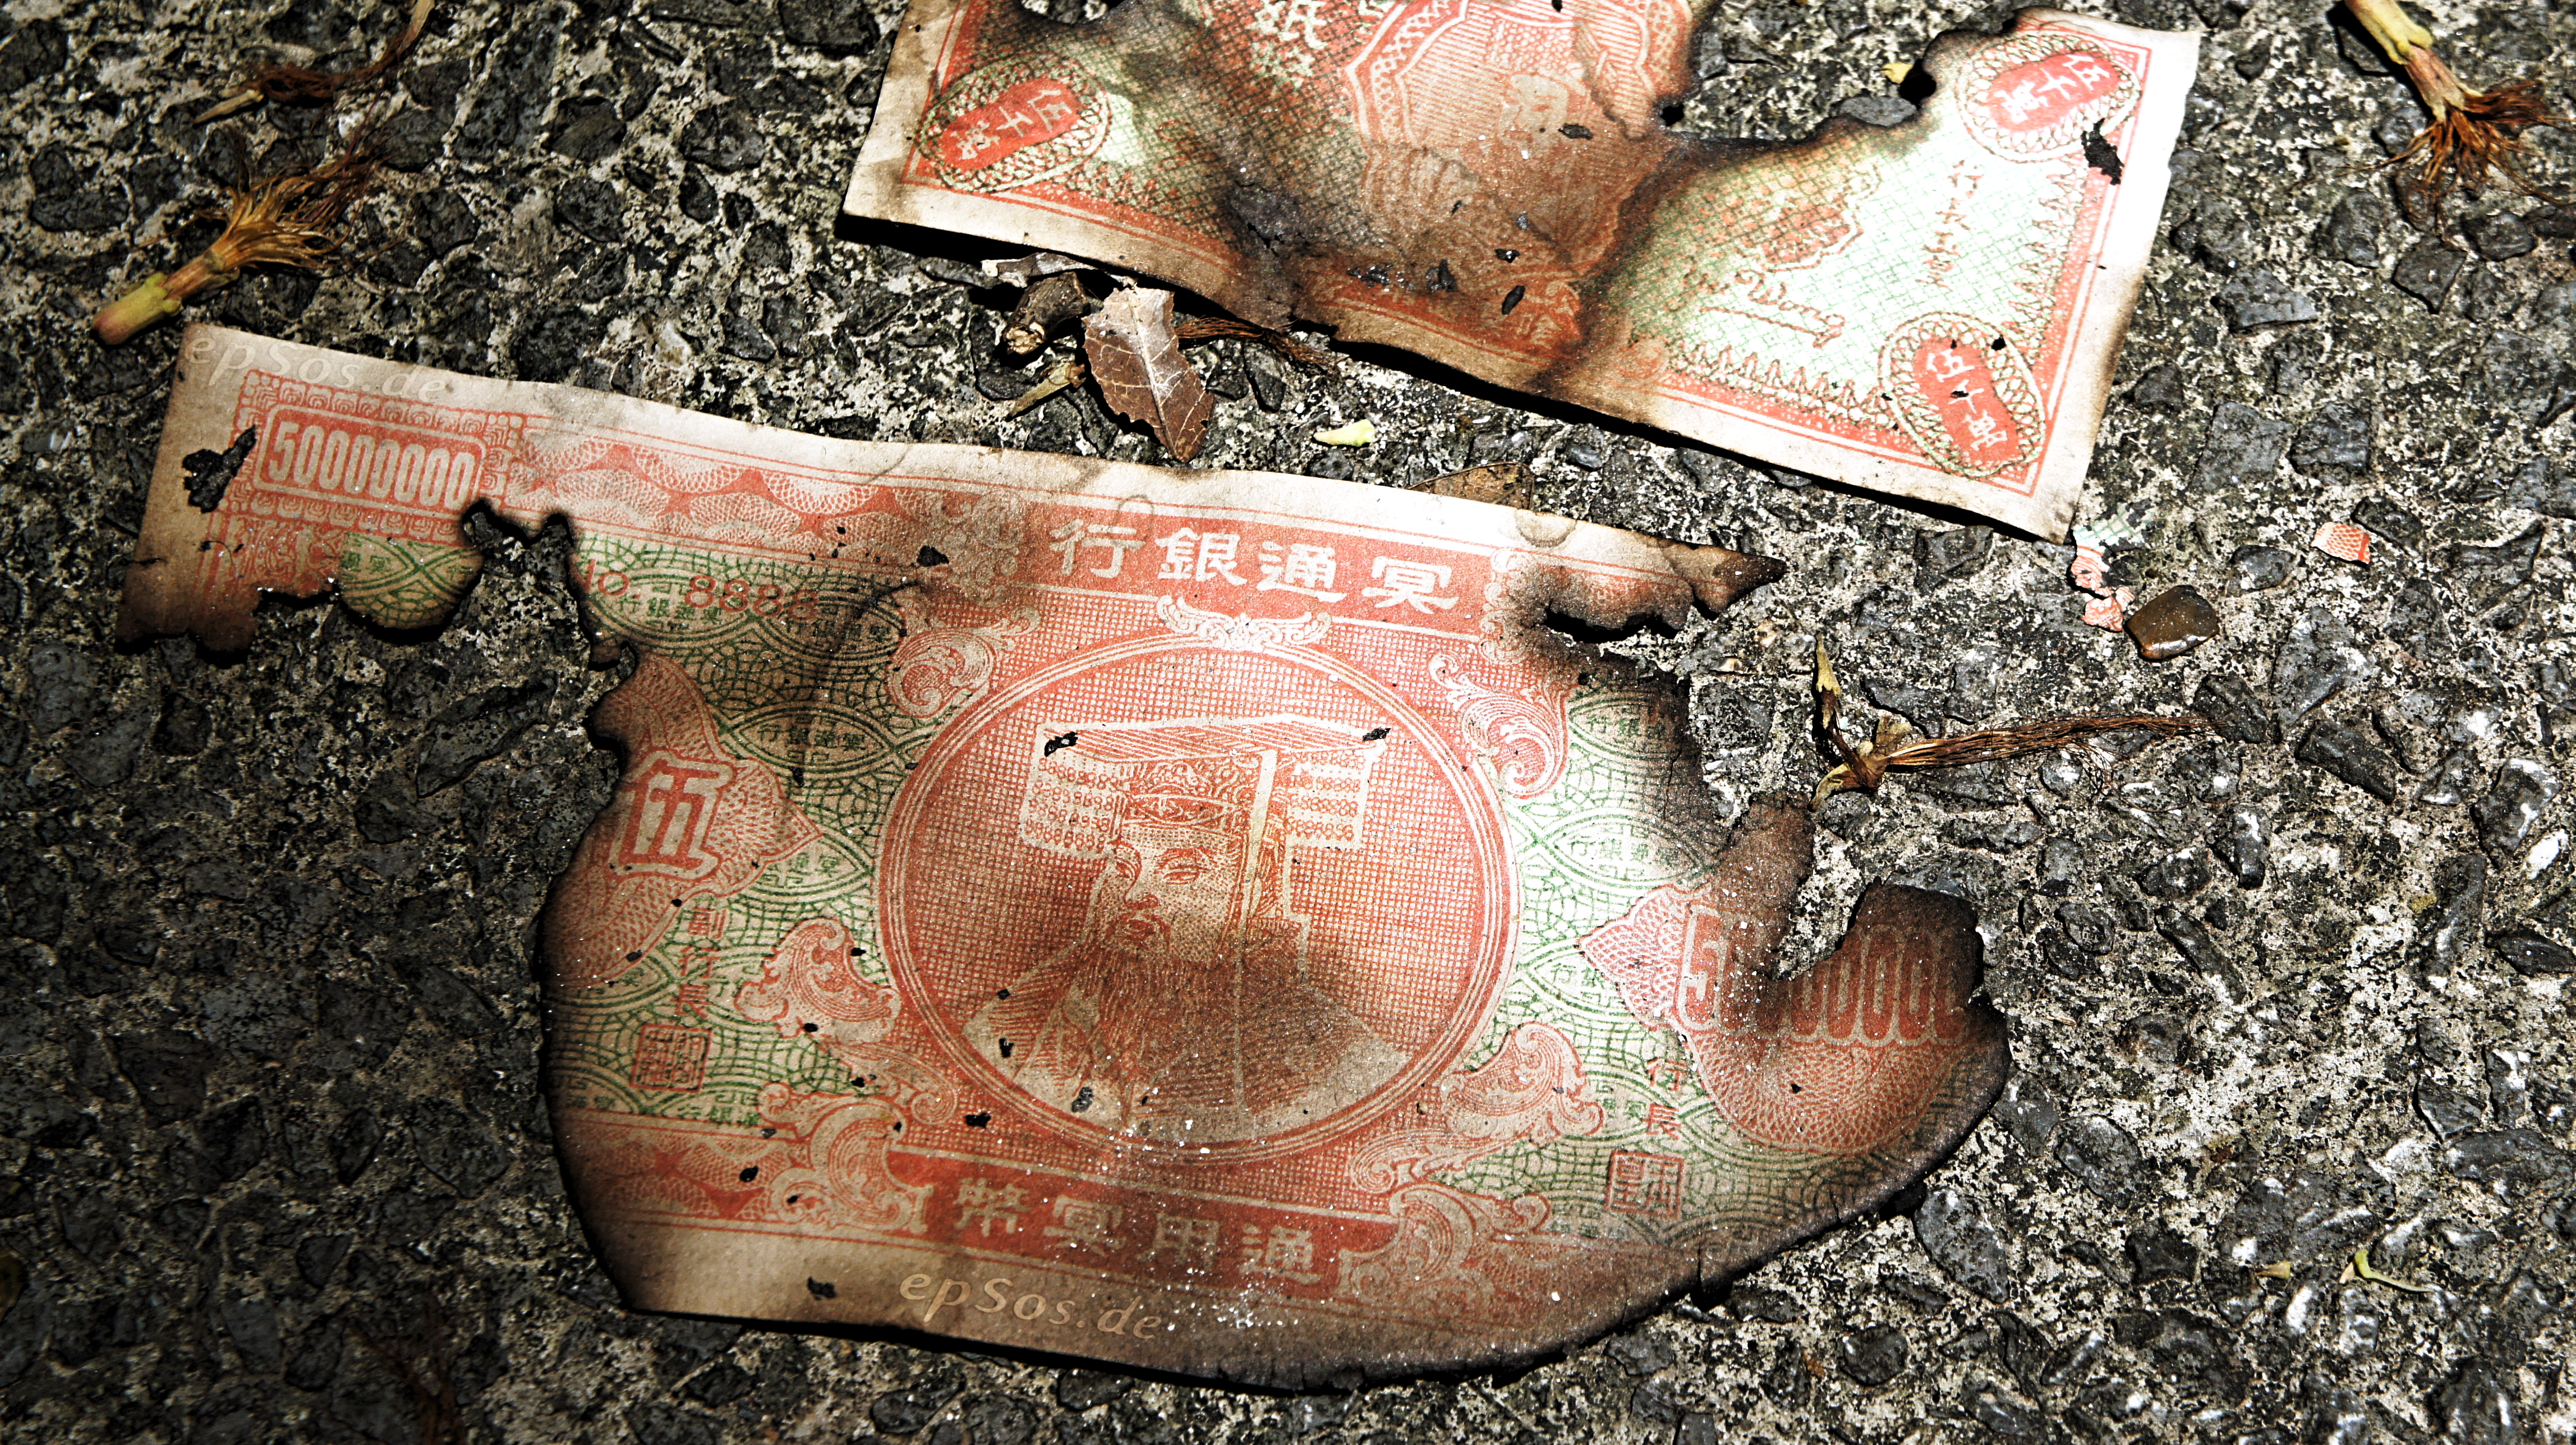 Burning Money is Financial Crime and Waste in China